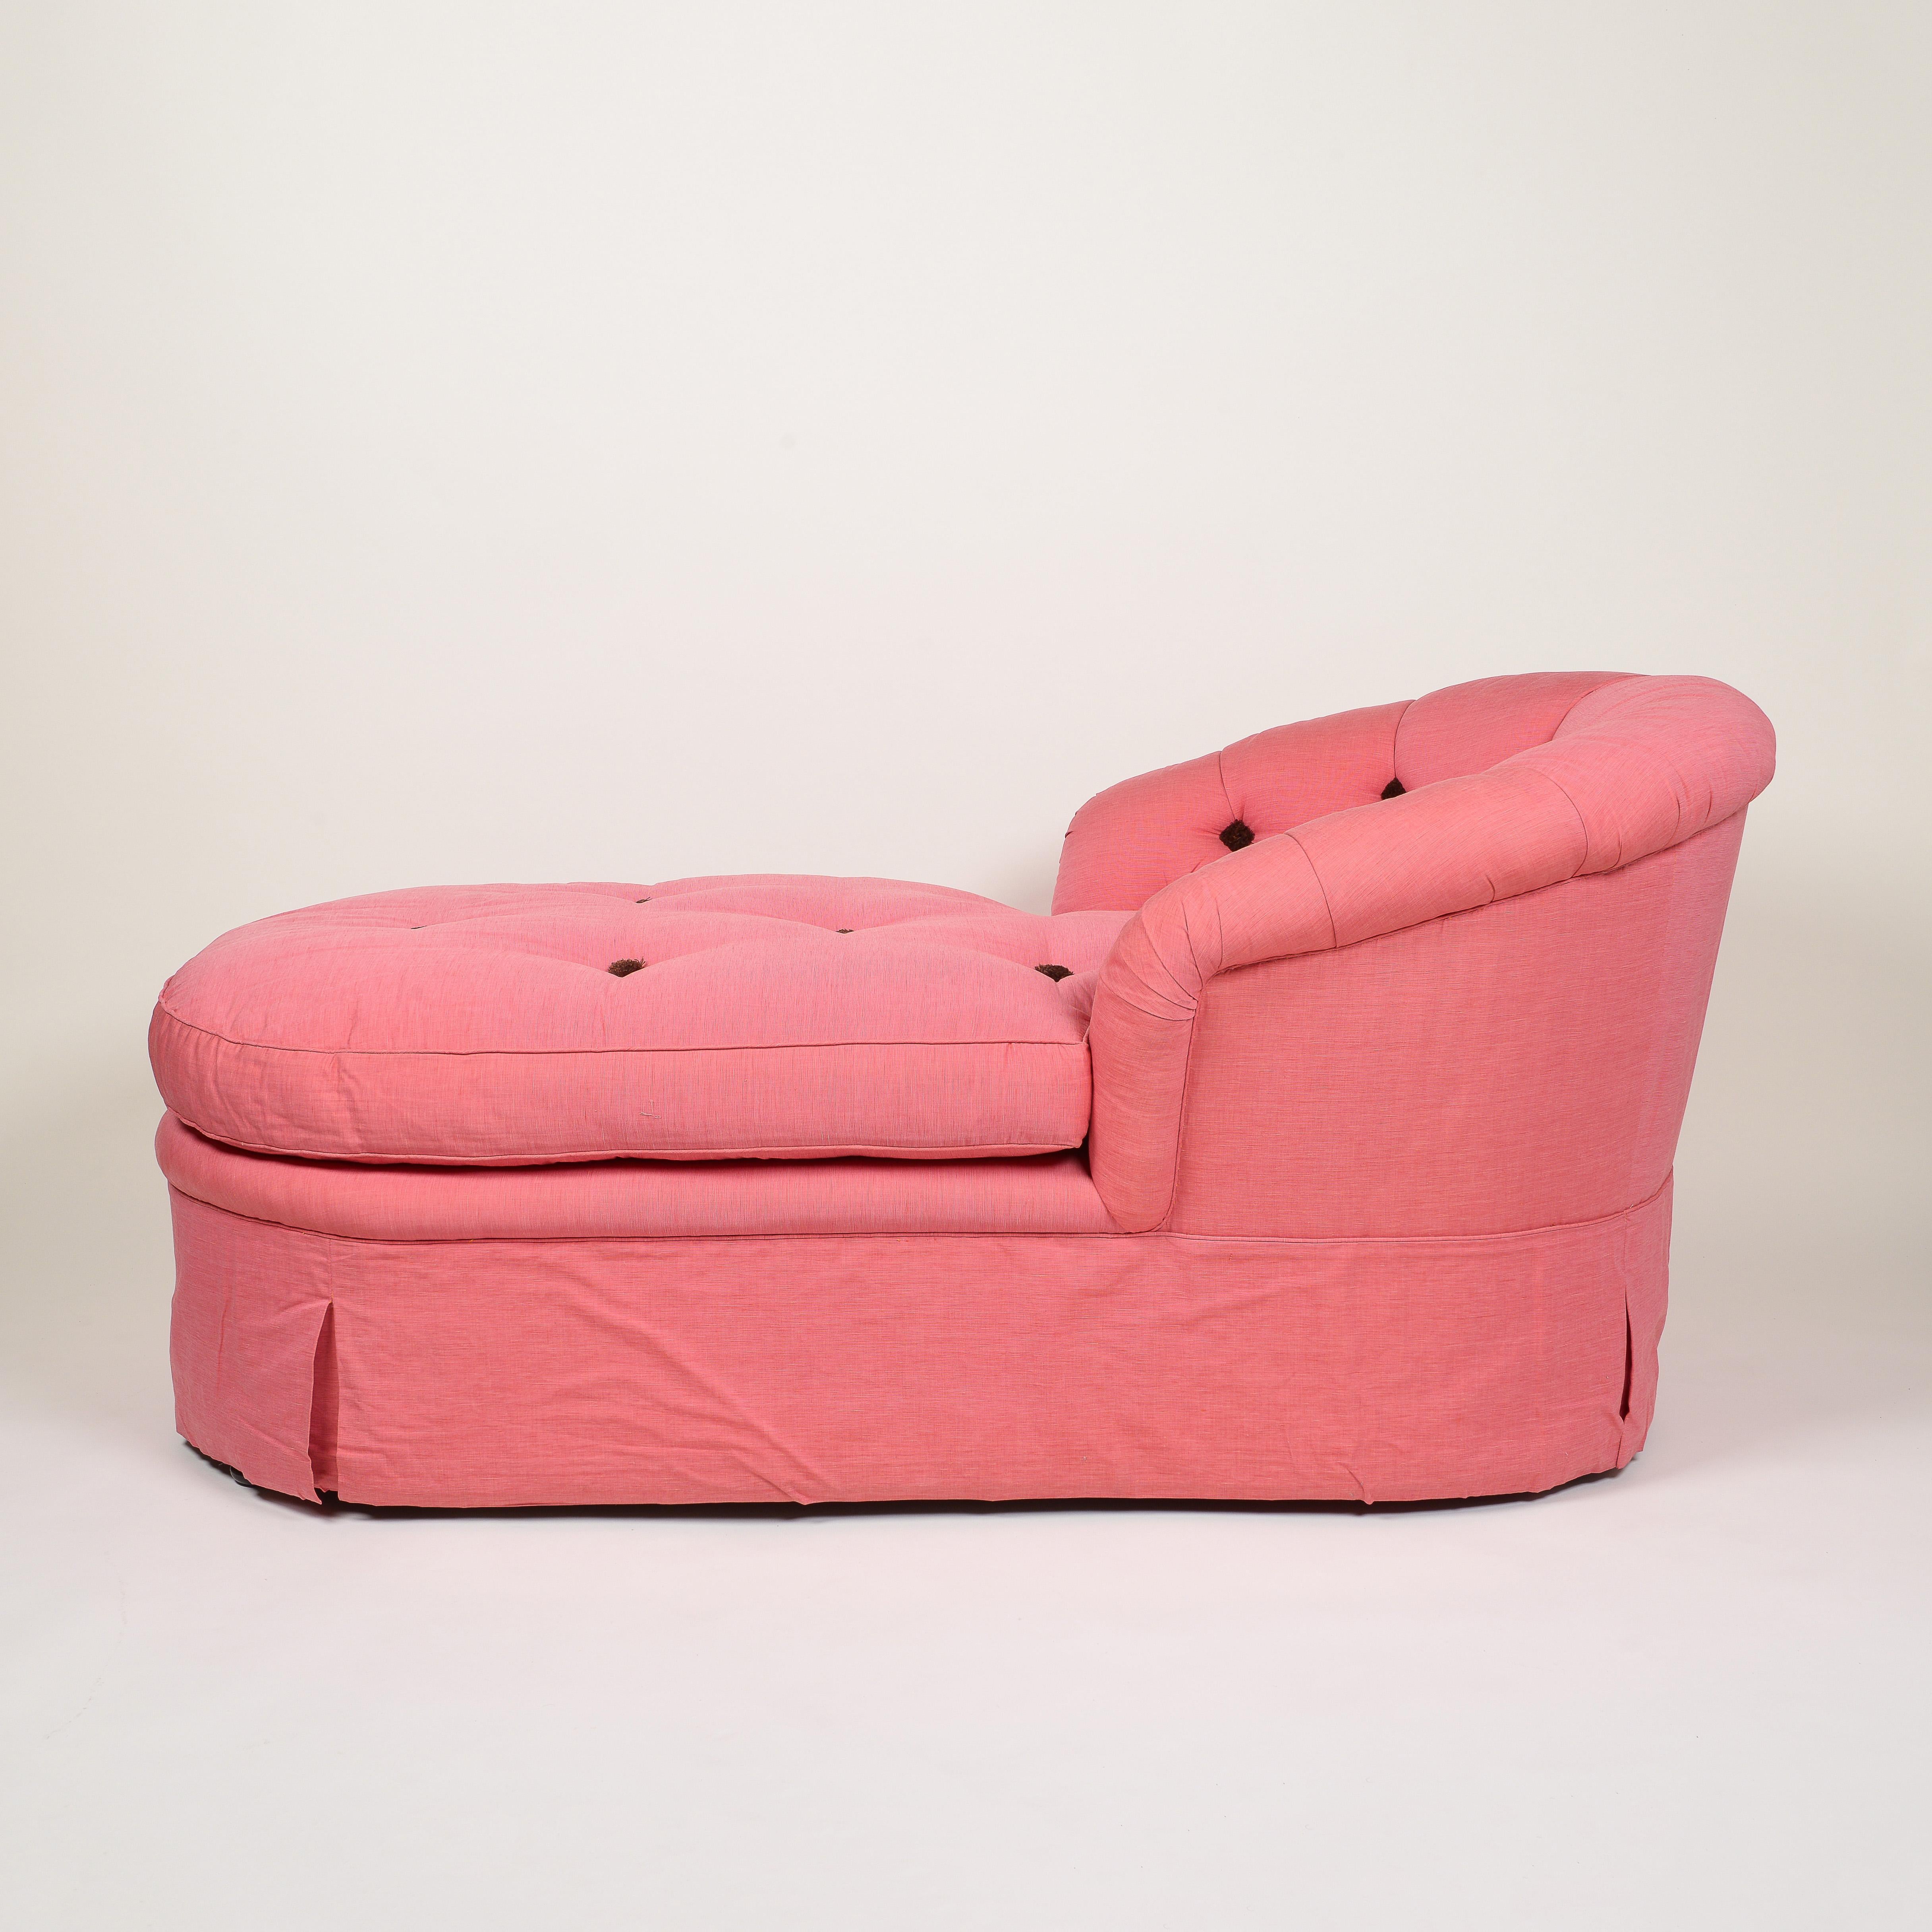 Victorian Raspberry Cotton-Upholstered Tufted Chaise Longue